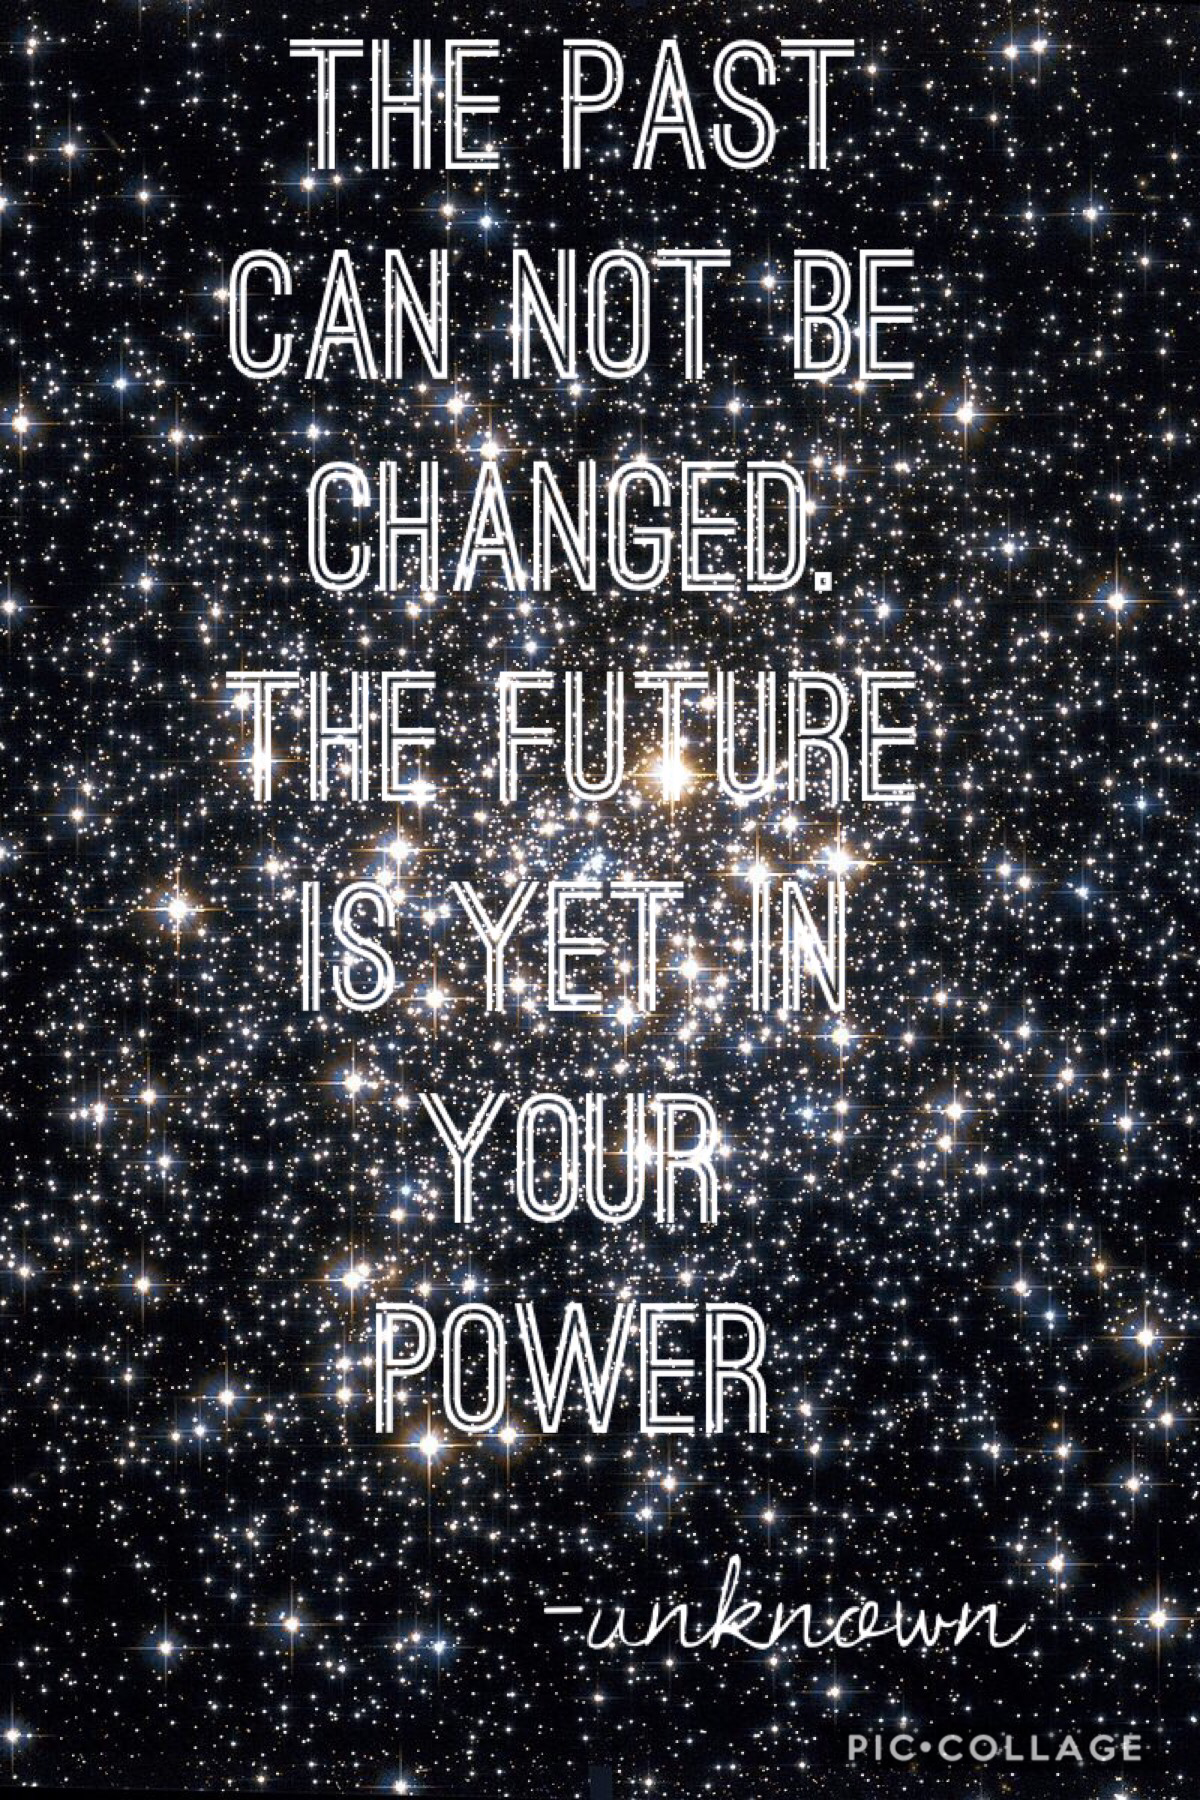 A quick quote for all those people who want to change the past